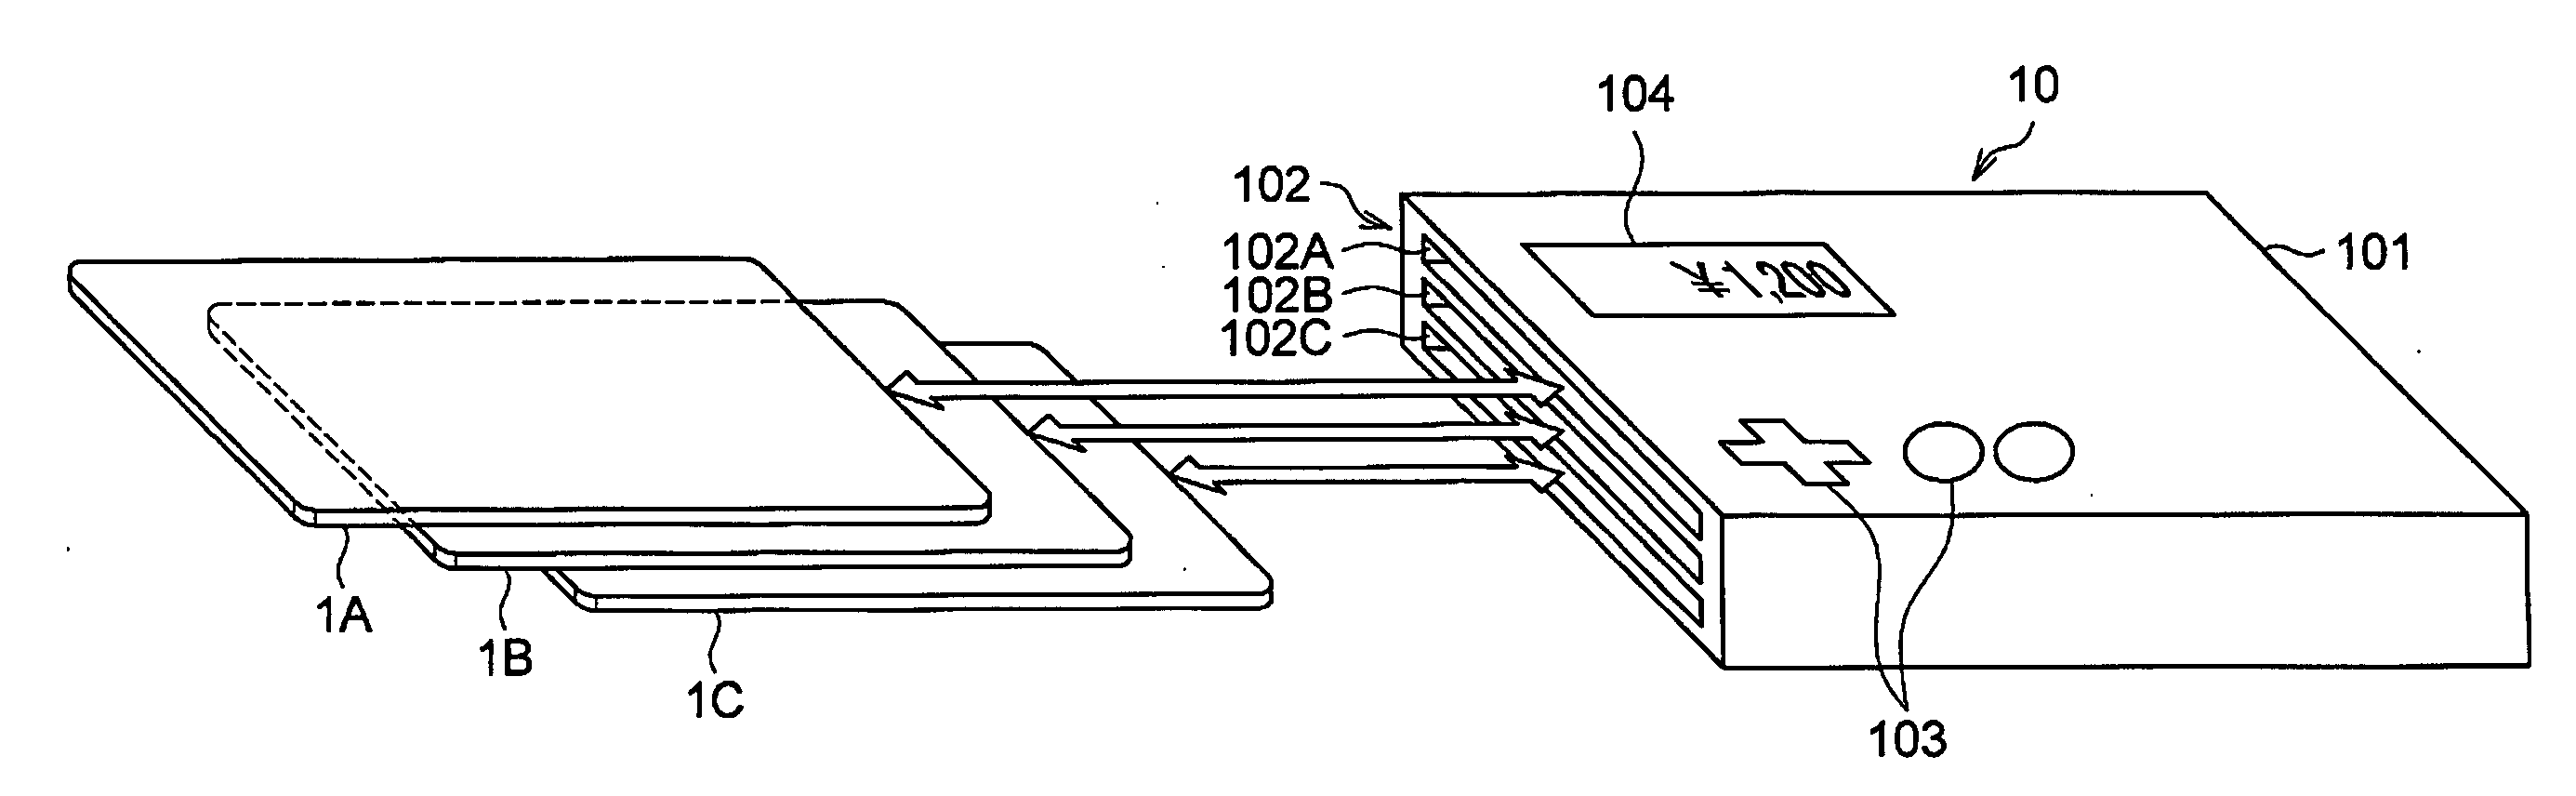 Electronic wallet device and method of using electronic value